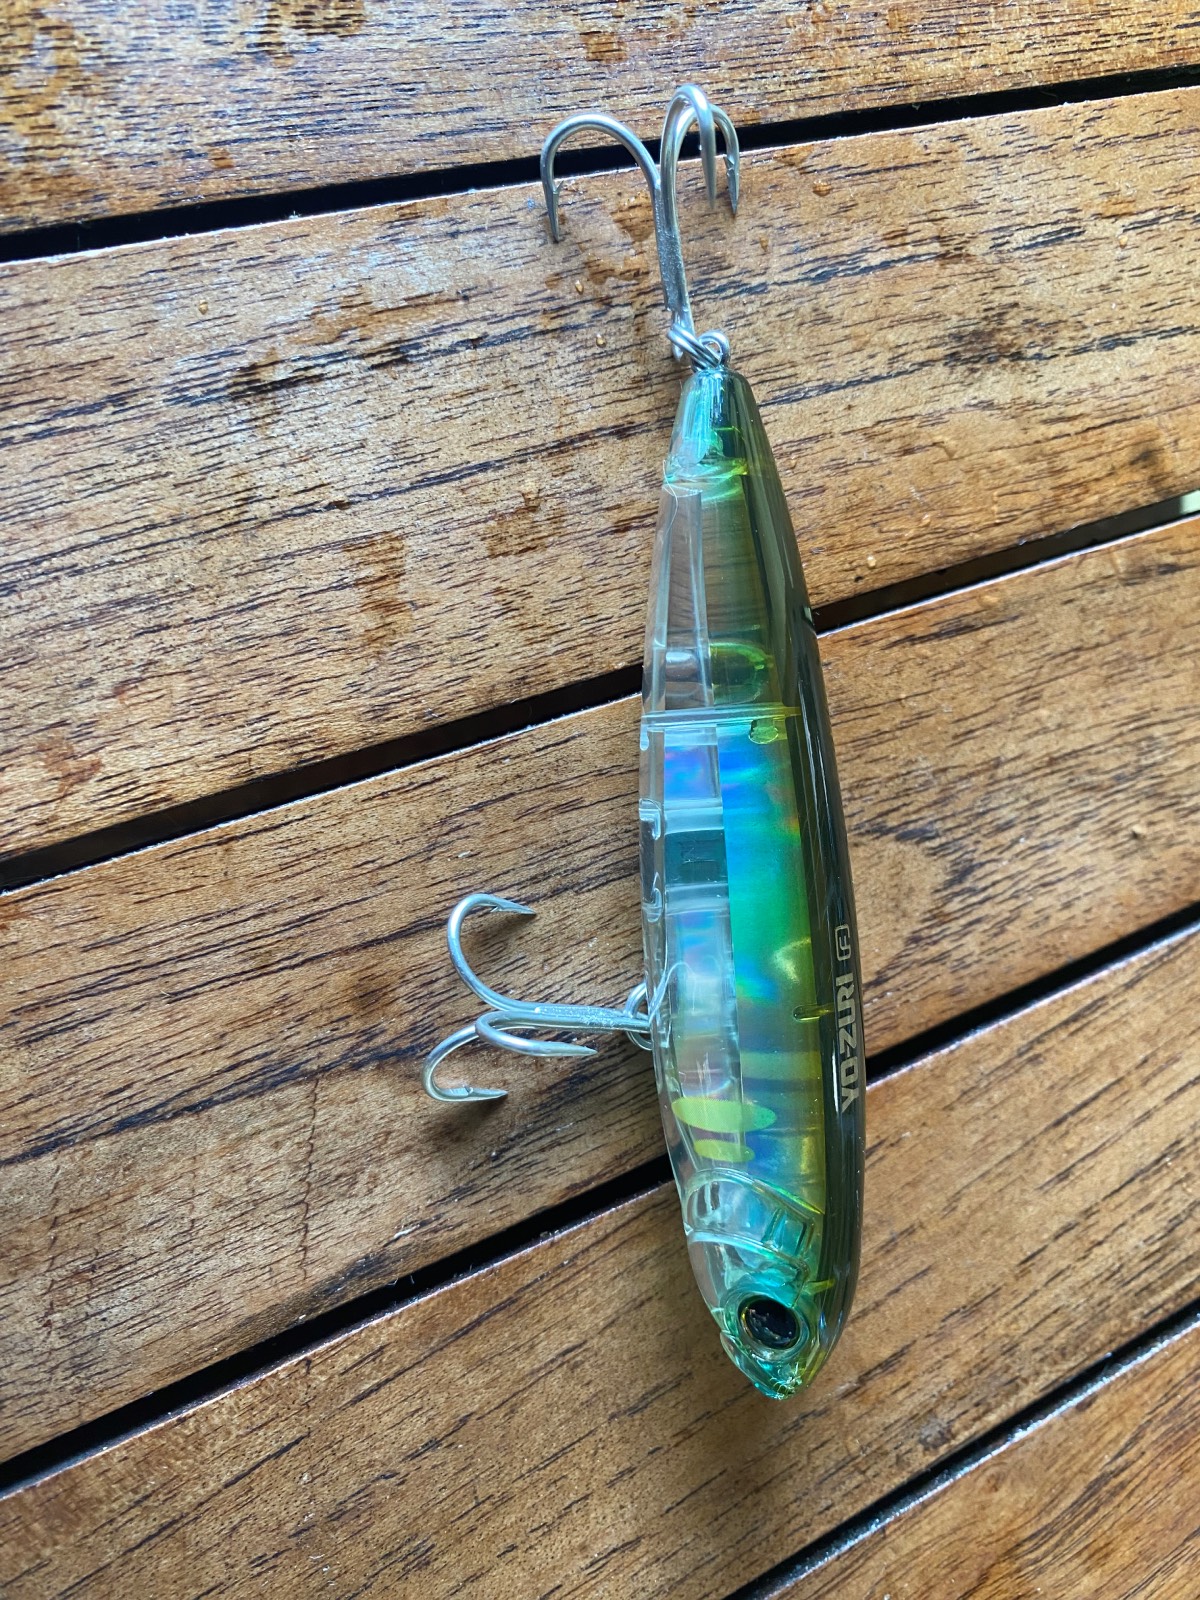 Barred Rock - Top Searun Trout Feathered Lure - Good in Clear Water